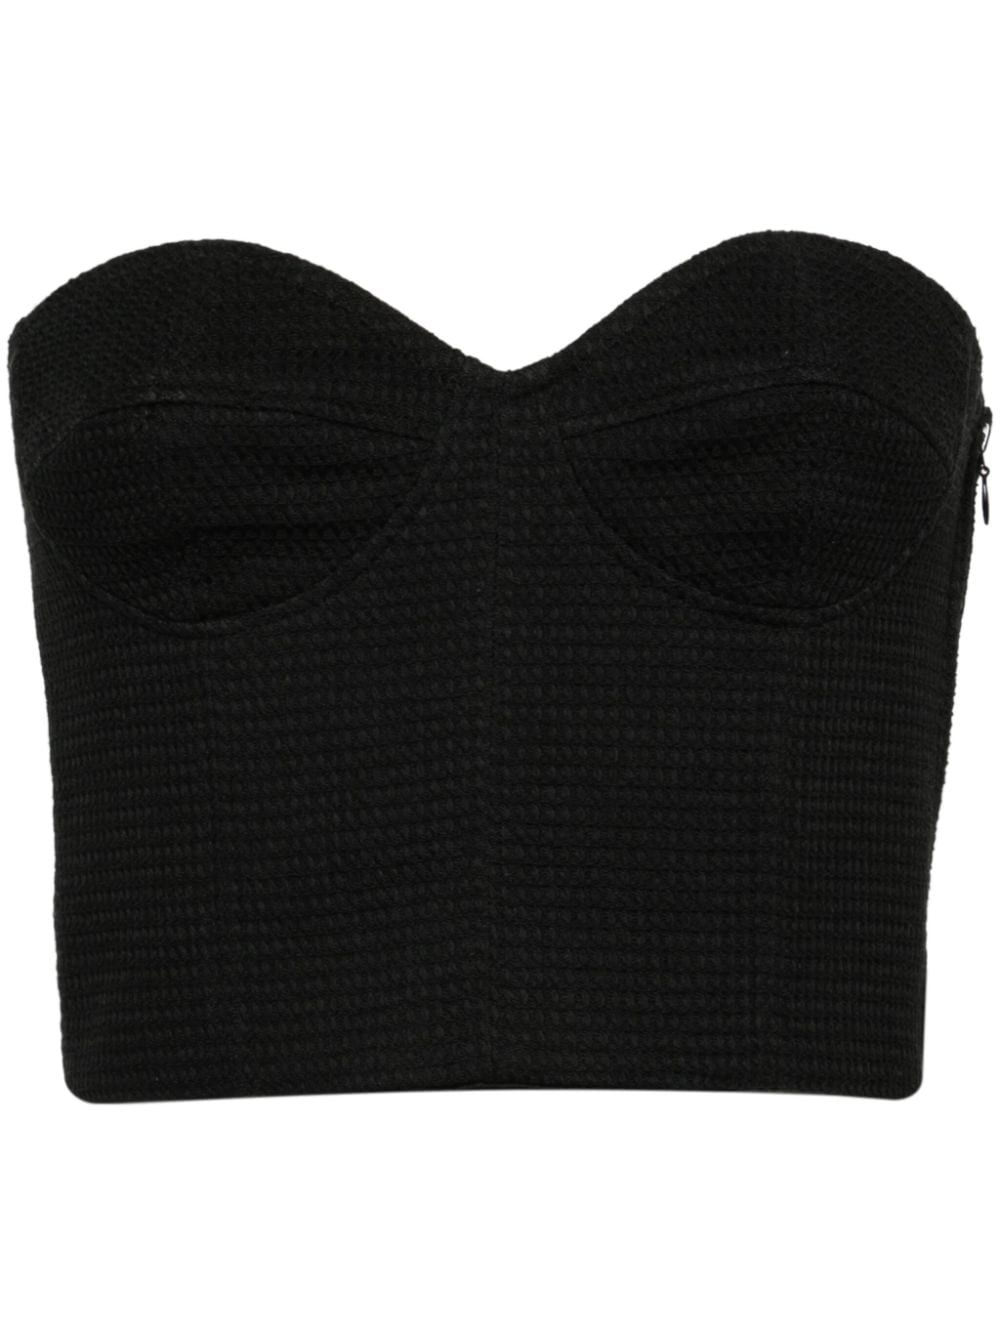 Forte Forte sweetheart cropped top - Black von Forte Forte